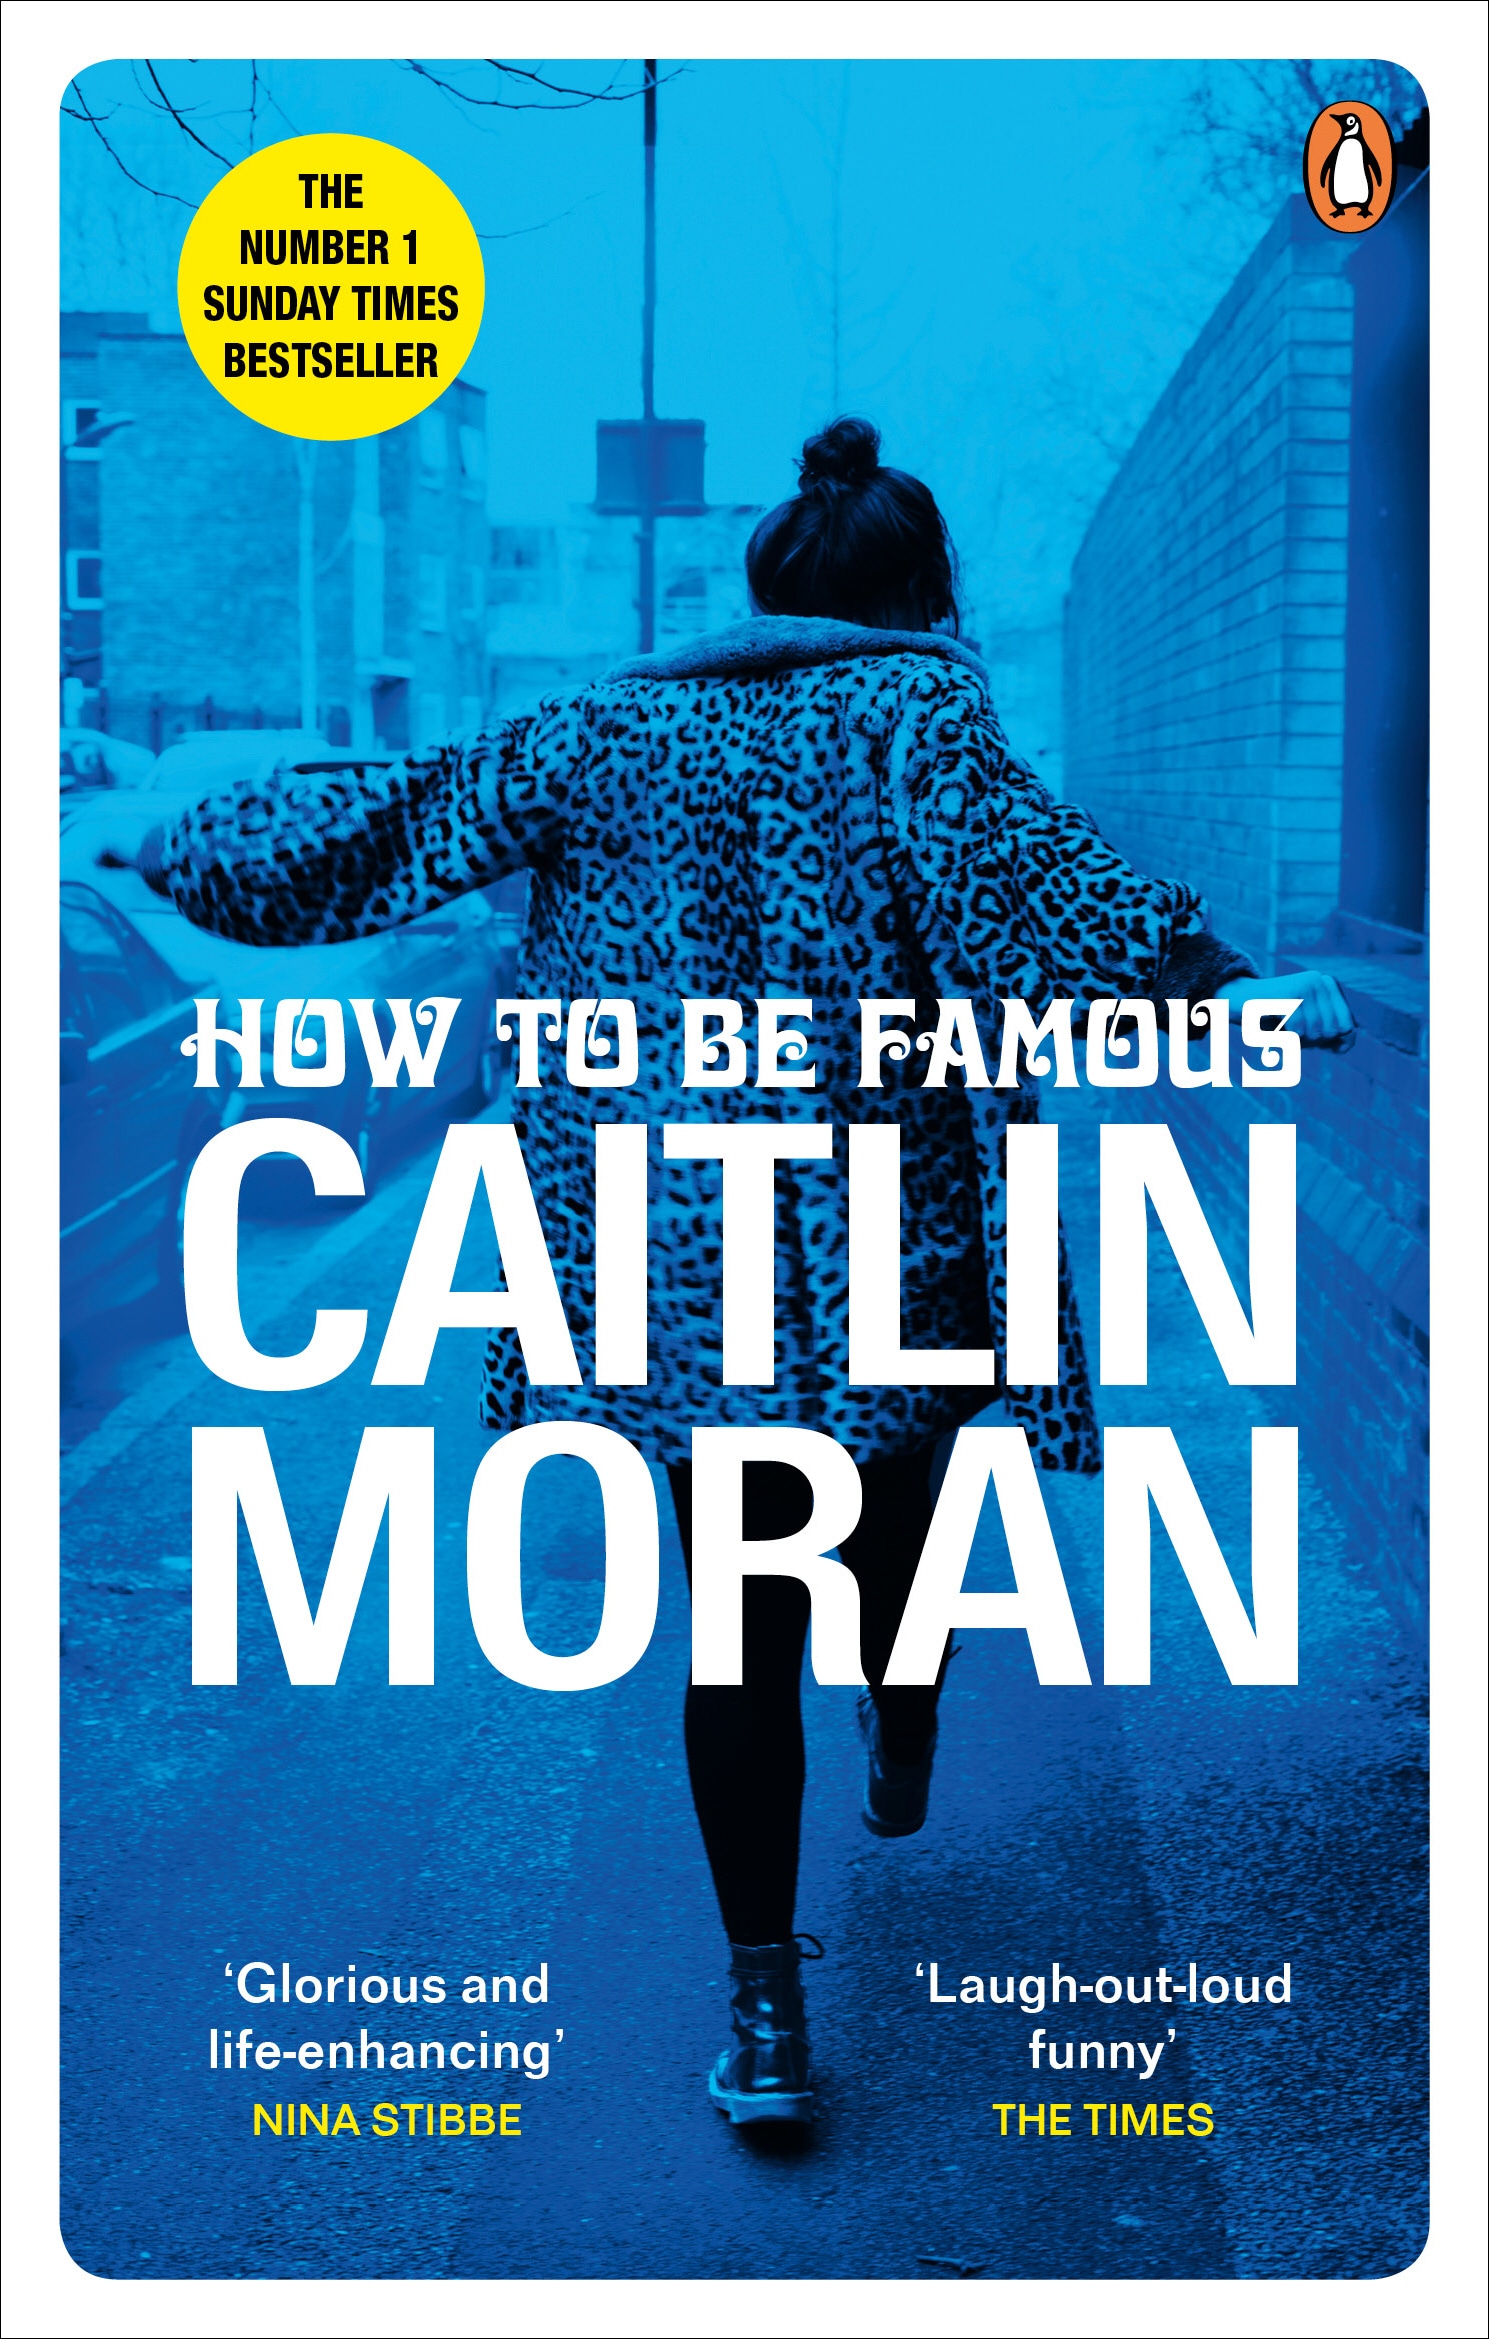 Book “How to be Famous” by Caitlin Moran — July 11, 2019